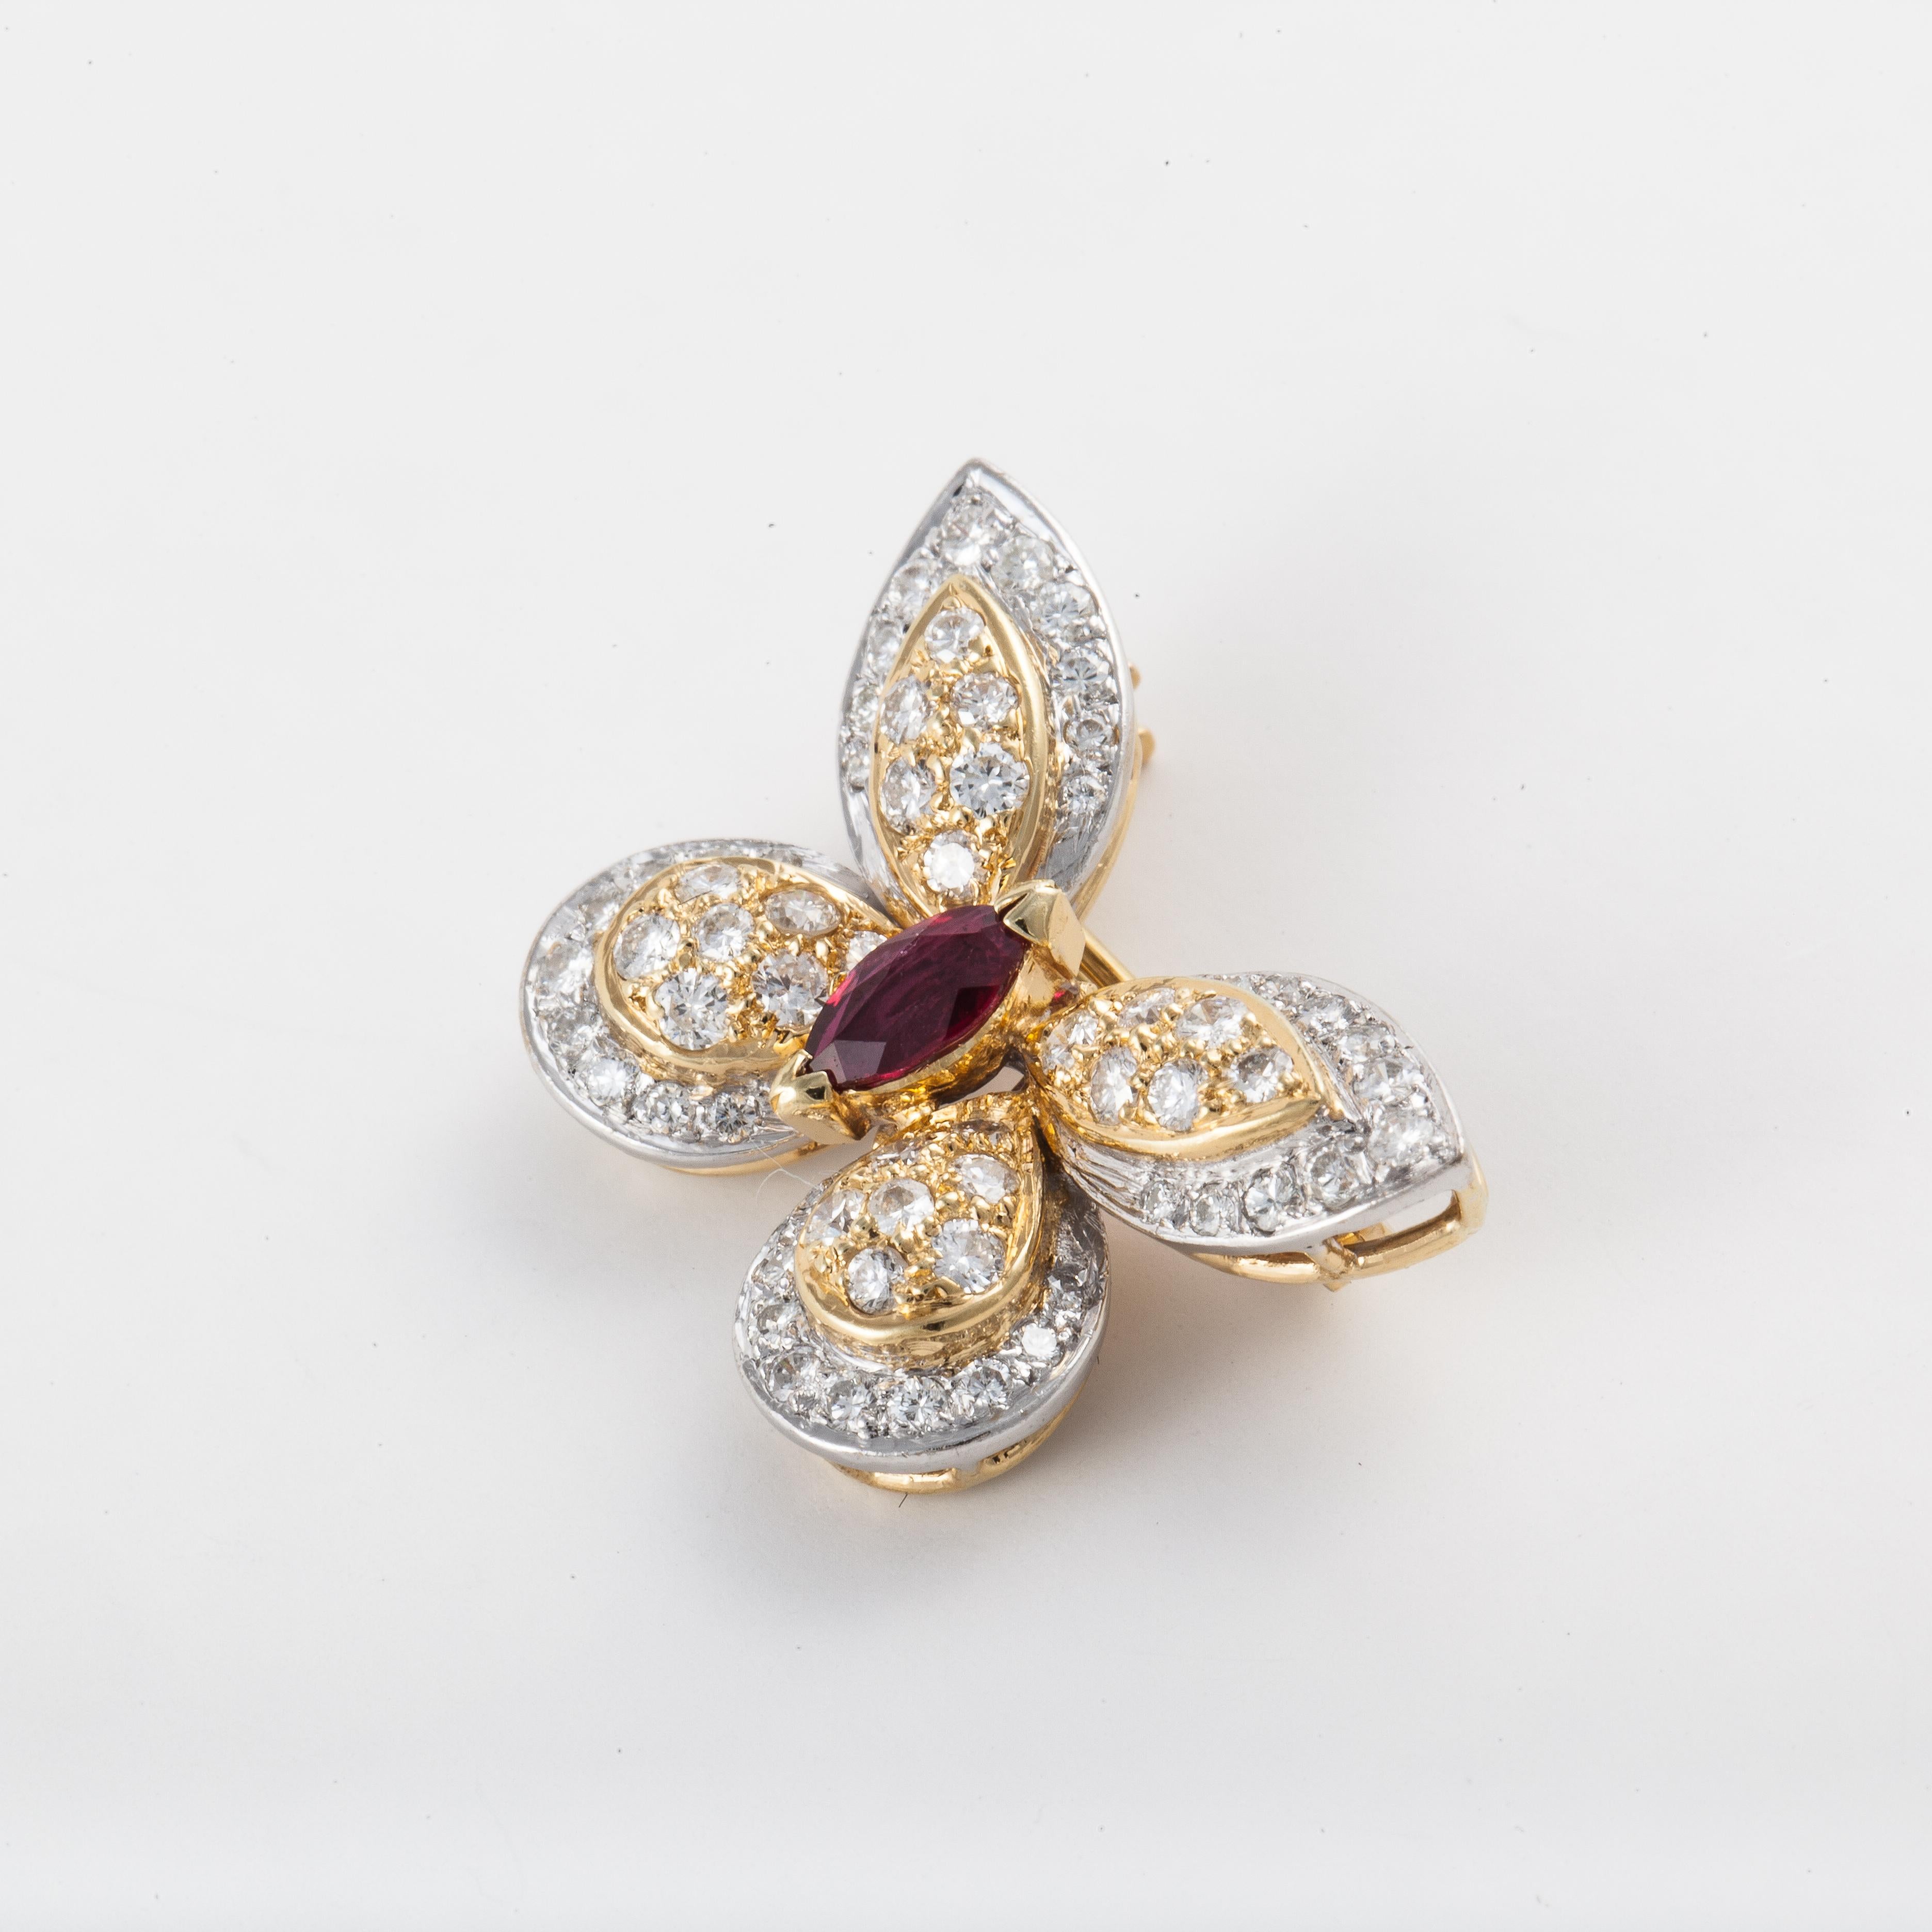 18K yellow and white gold small butterfly pin.  There are fifty (50) round diamonds totaling 1.25 carats.  The body is a marquise ruby.  Measures 7/8